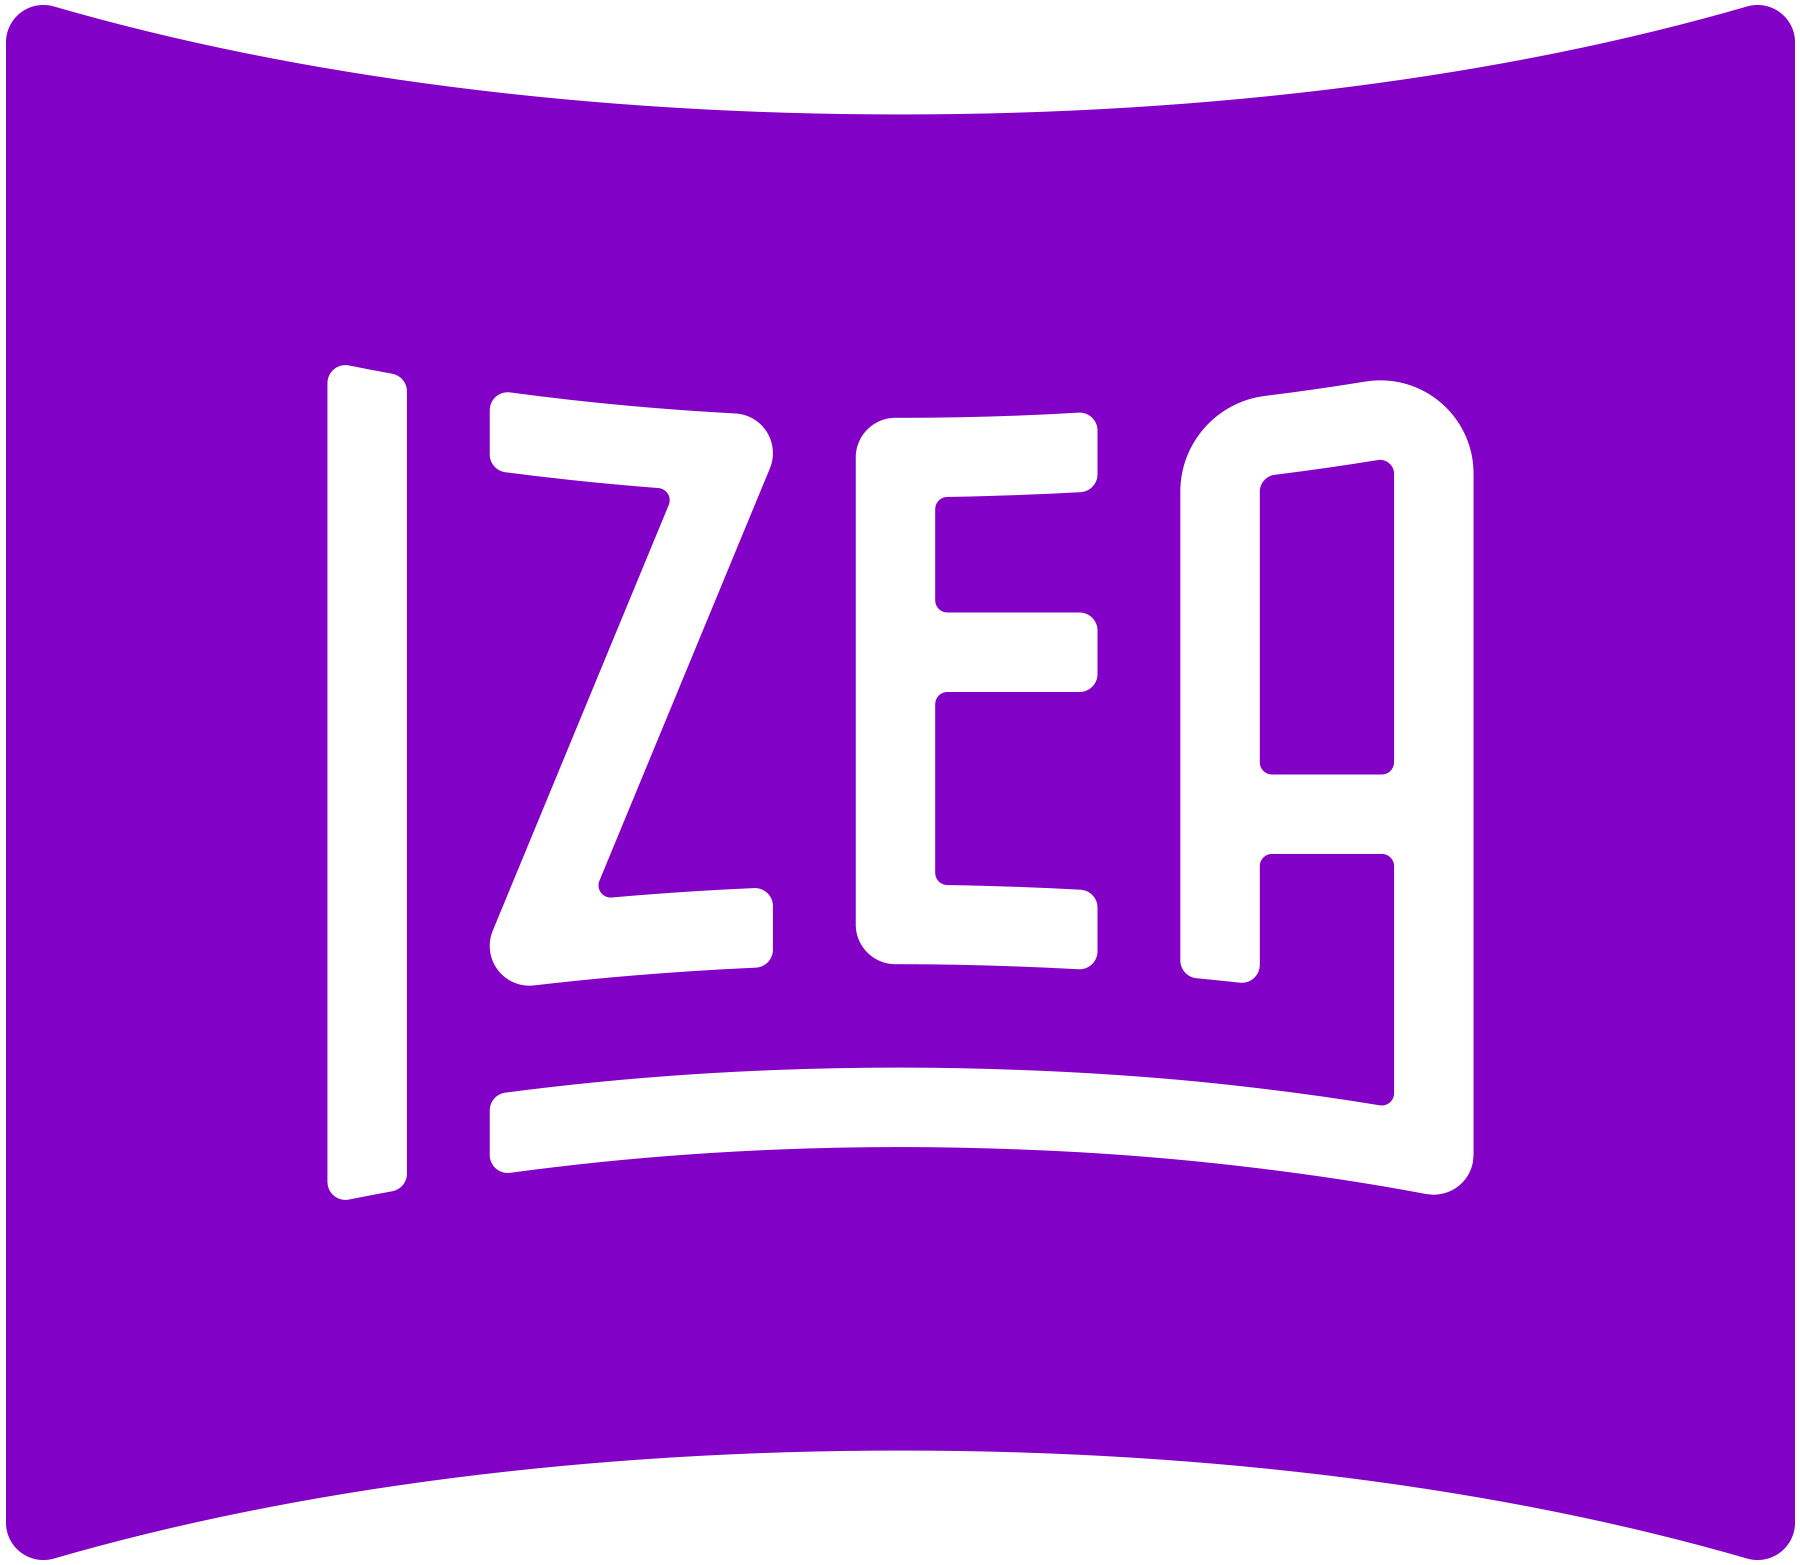 IZEA Announces A.I. Storyboards and Cloud Storage Now Available in IZEA Flex